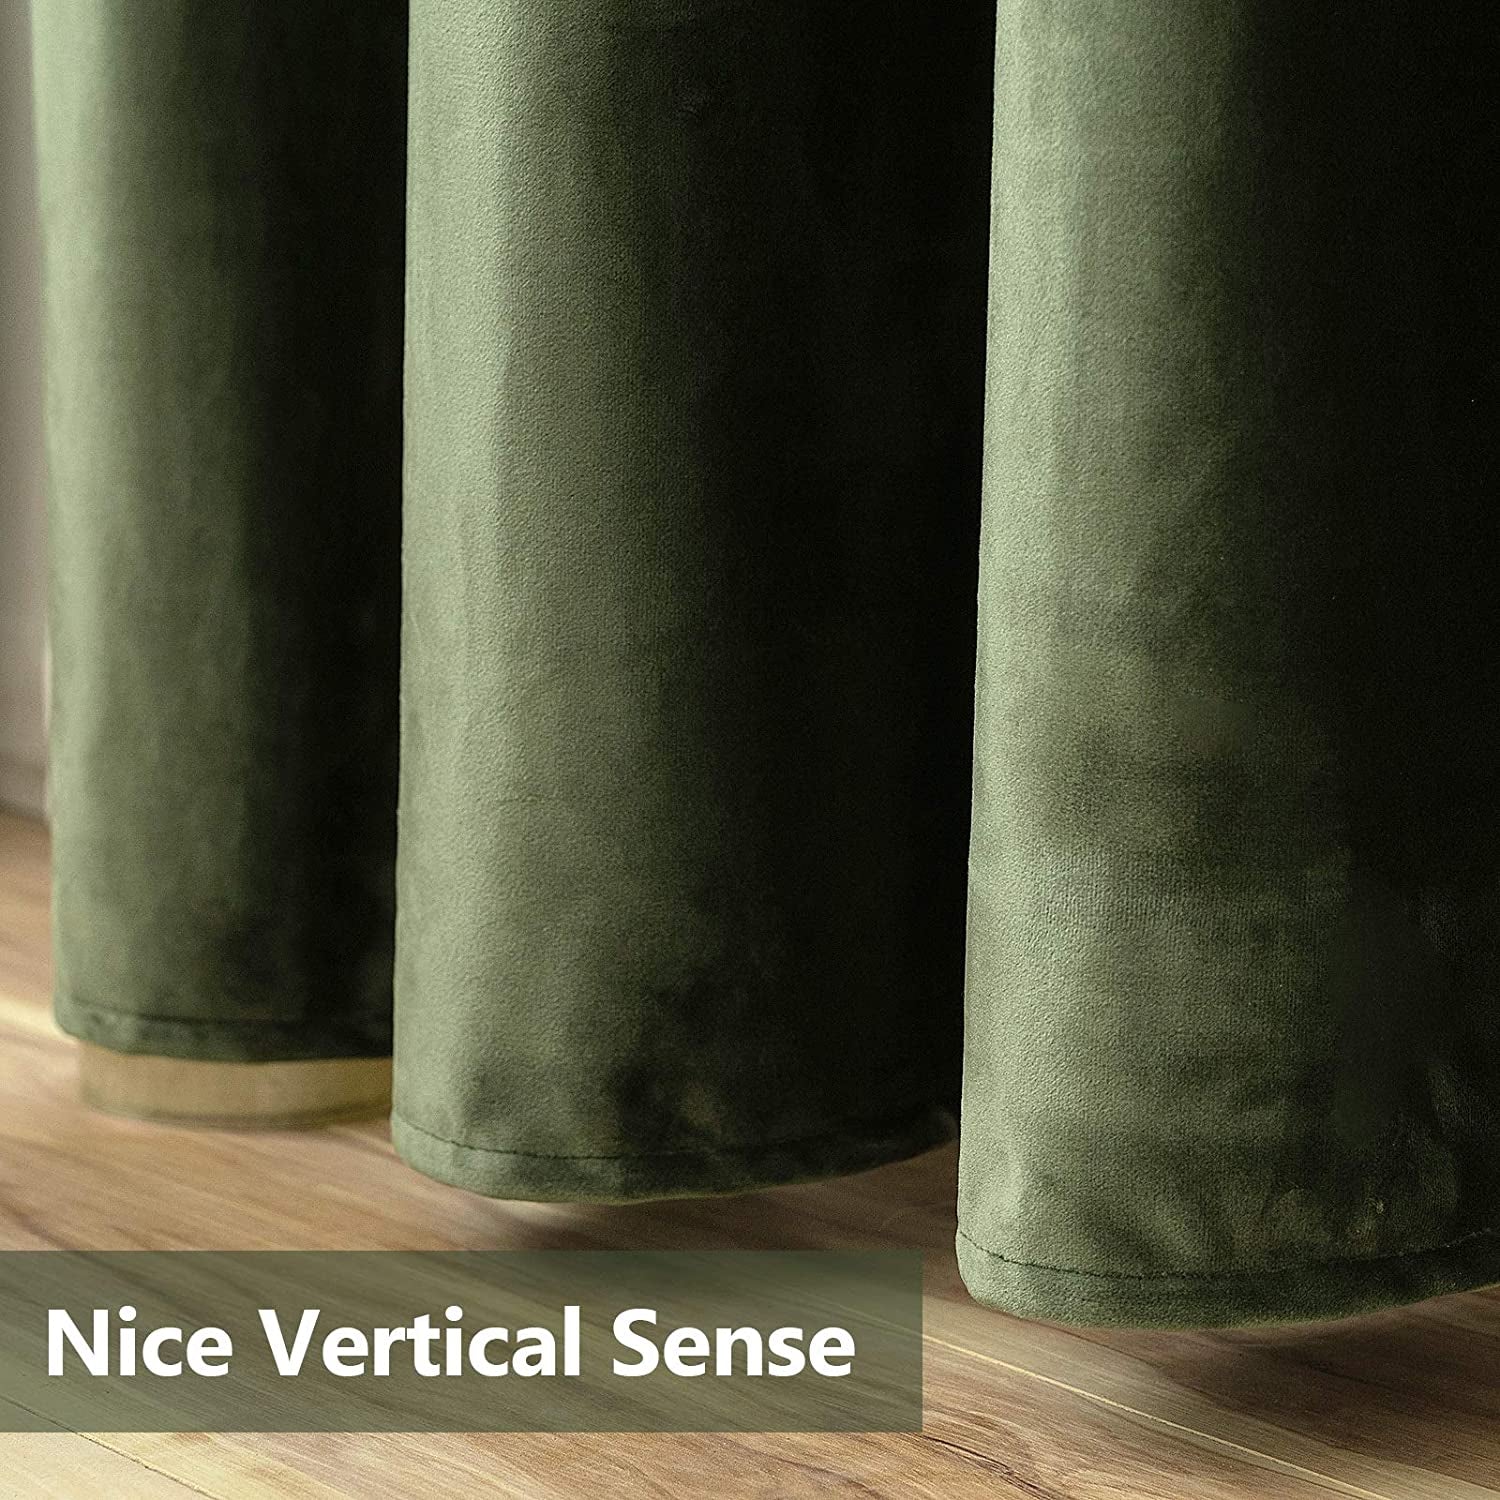 MIULEE Velvet Curtains Olive Green Elegant Grommet Curtains Thermal Insulated Soundproof Room Darkening Curtains/Drapes for Classical Living Room Bedroom Decor 52 X 84 Inch Set of 2  MIULEE   